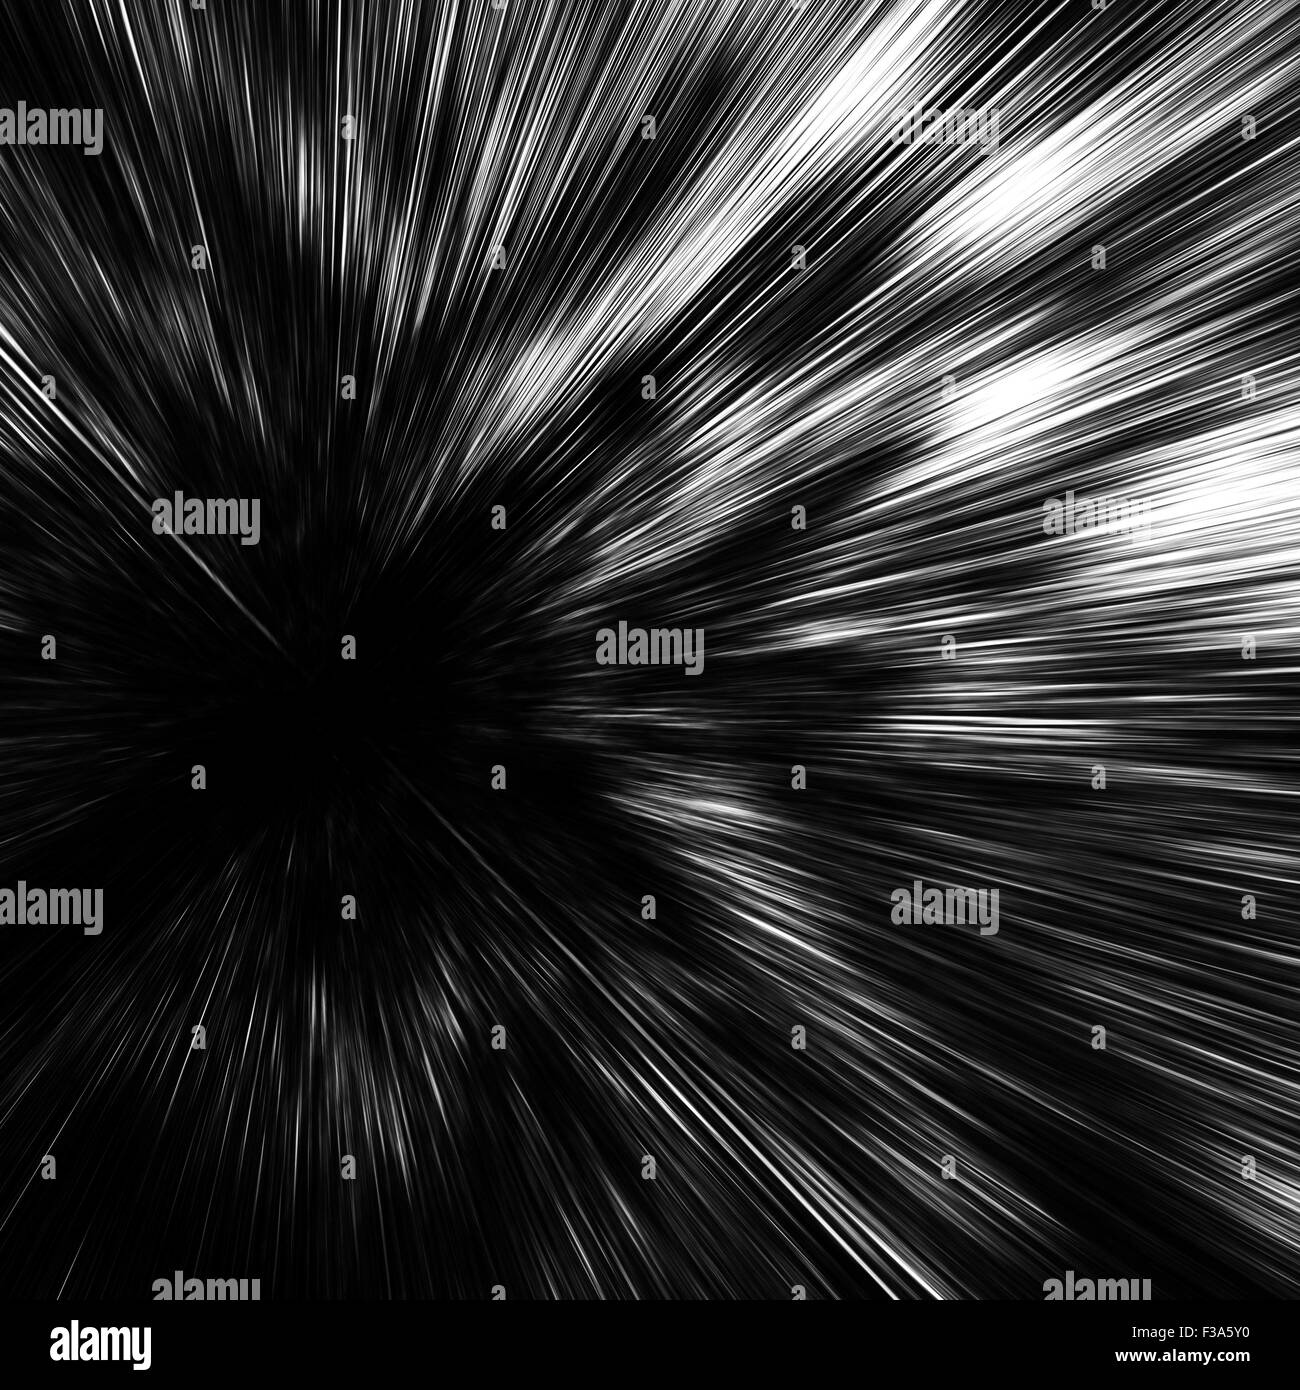 Abstract digital image with fast motion blur effect on black square background Stock Photo